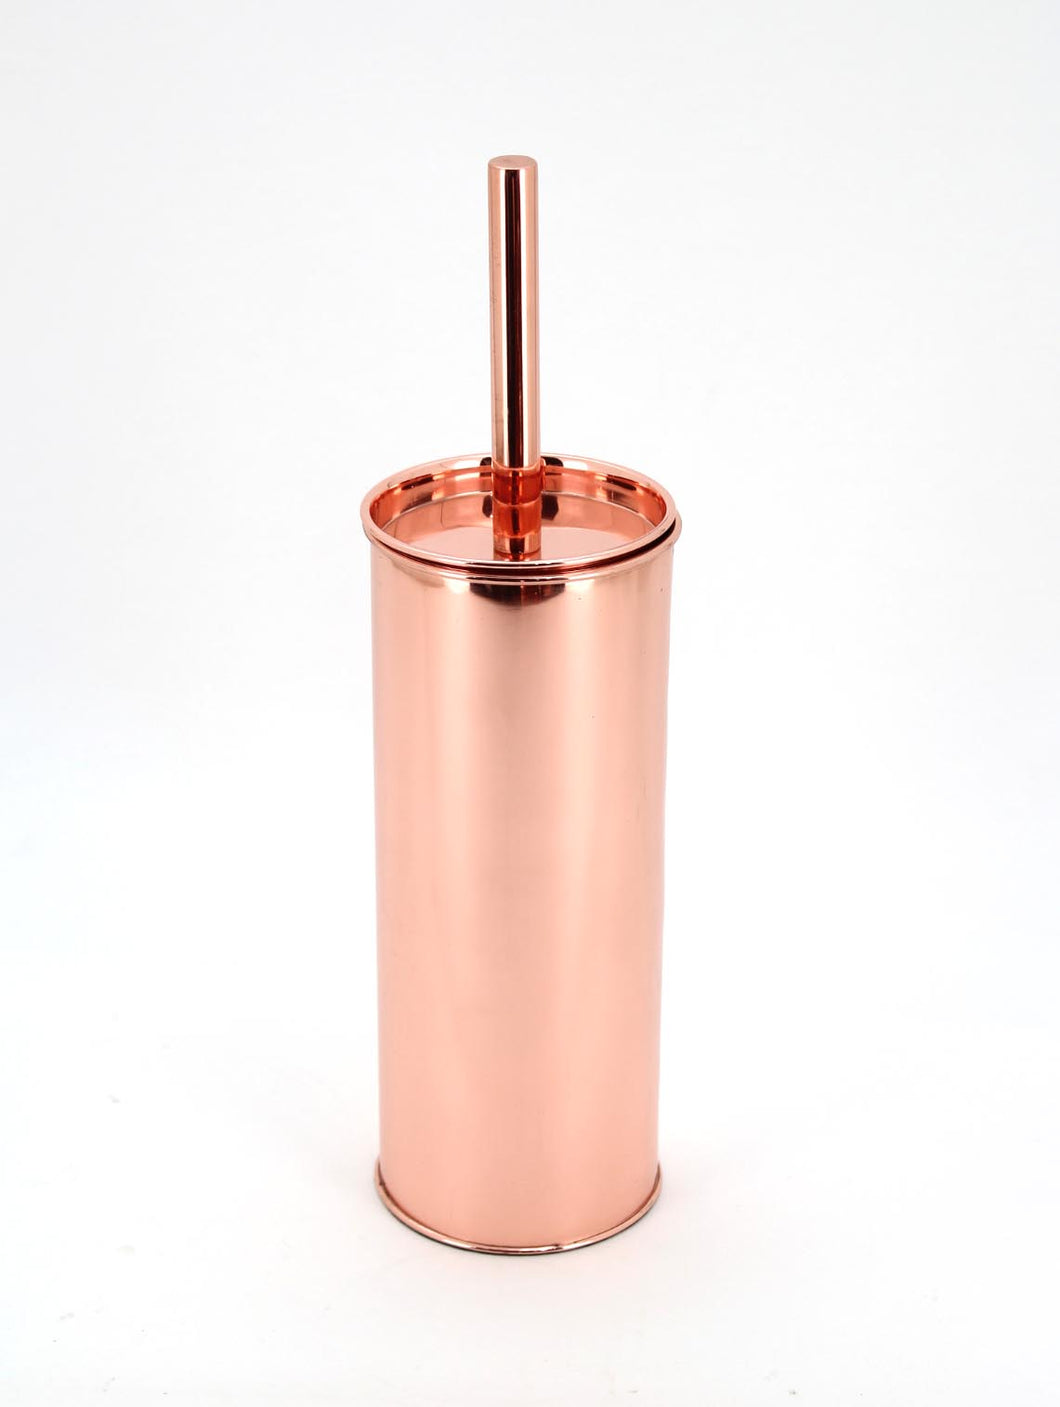 The Home Stainless Steel Toilet Brush Holder Copper Color